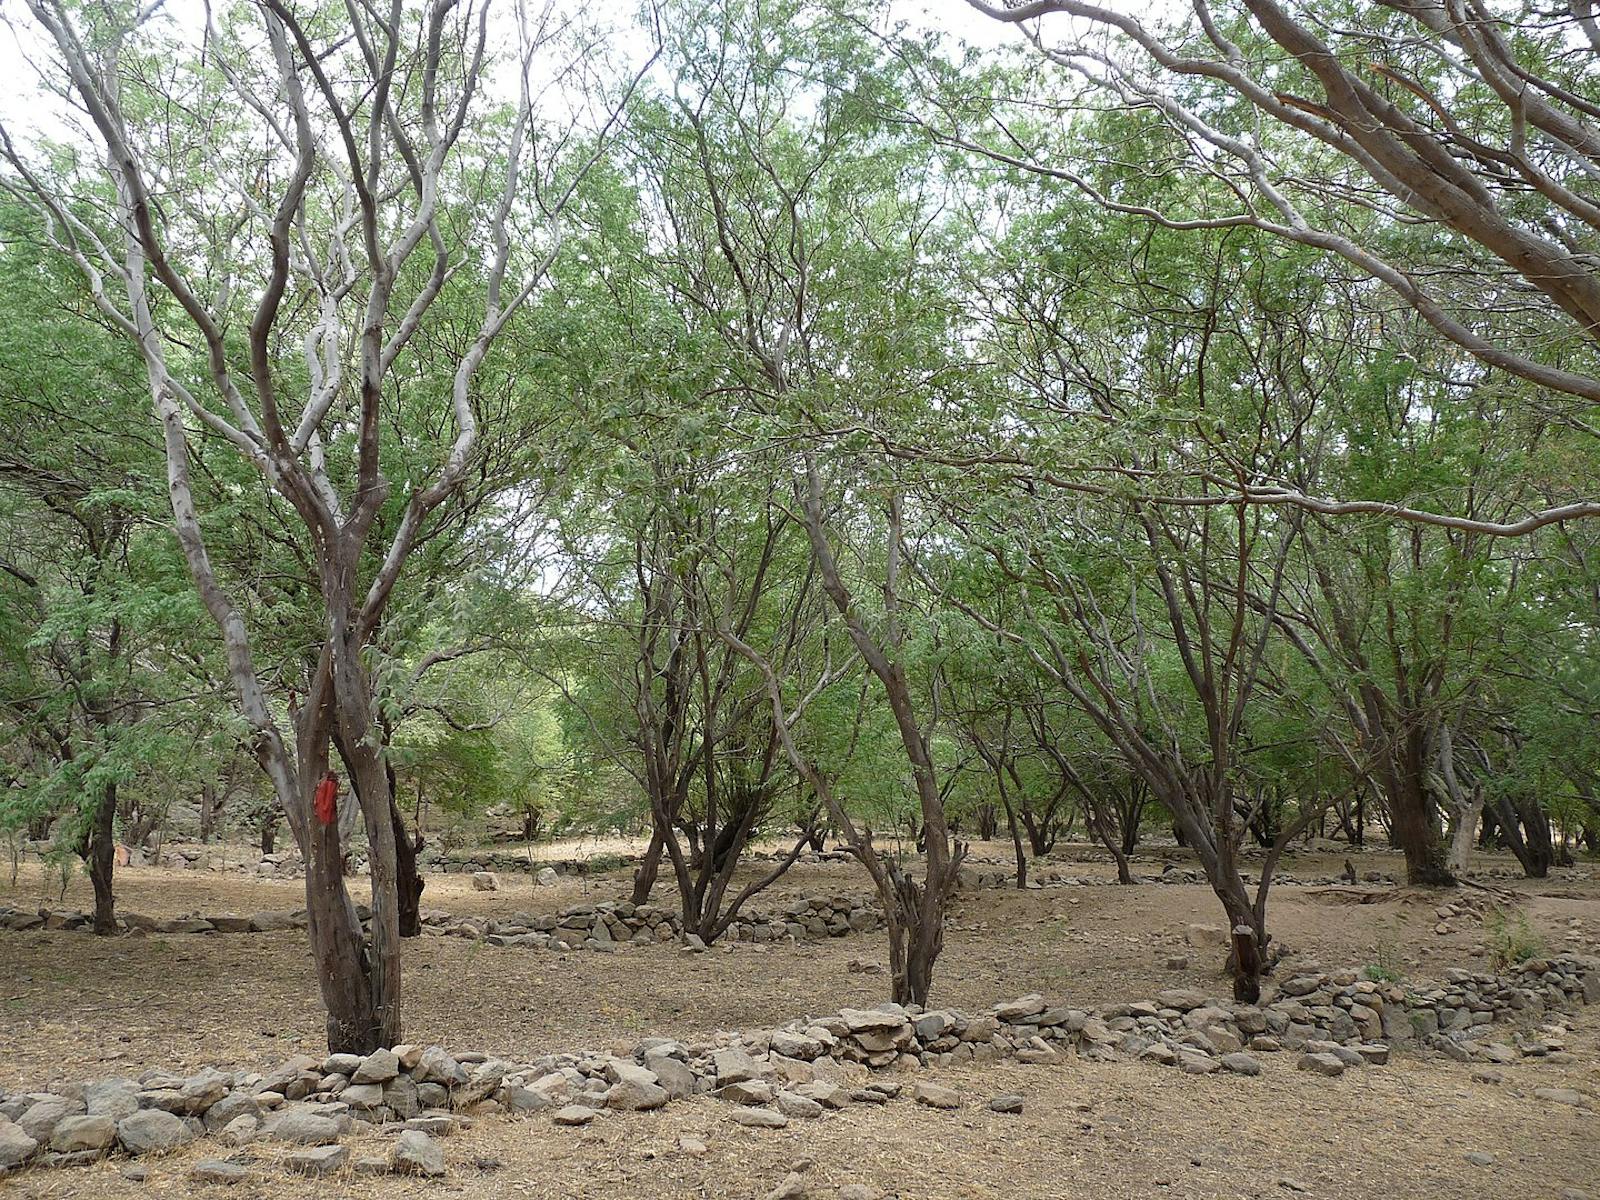 Cape Verde Islands Dry Forests